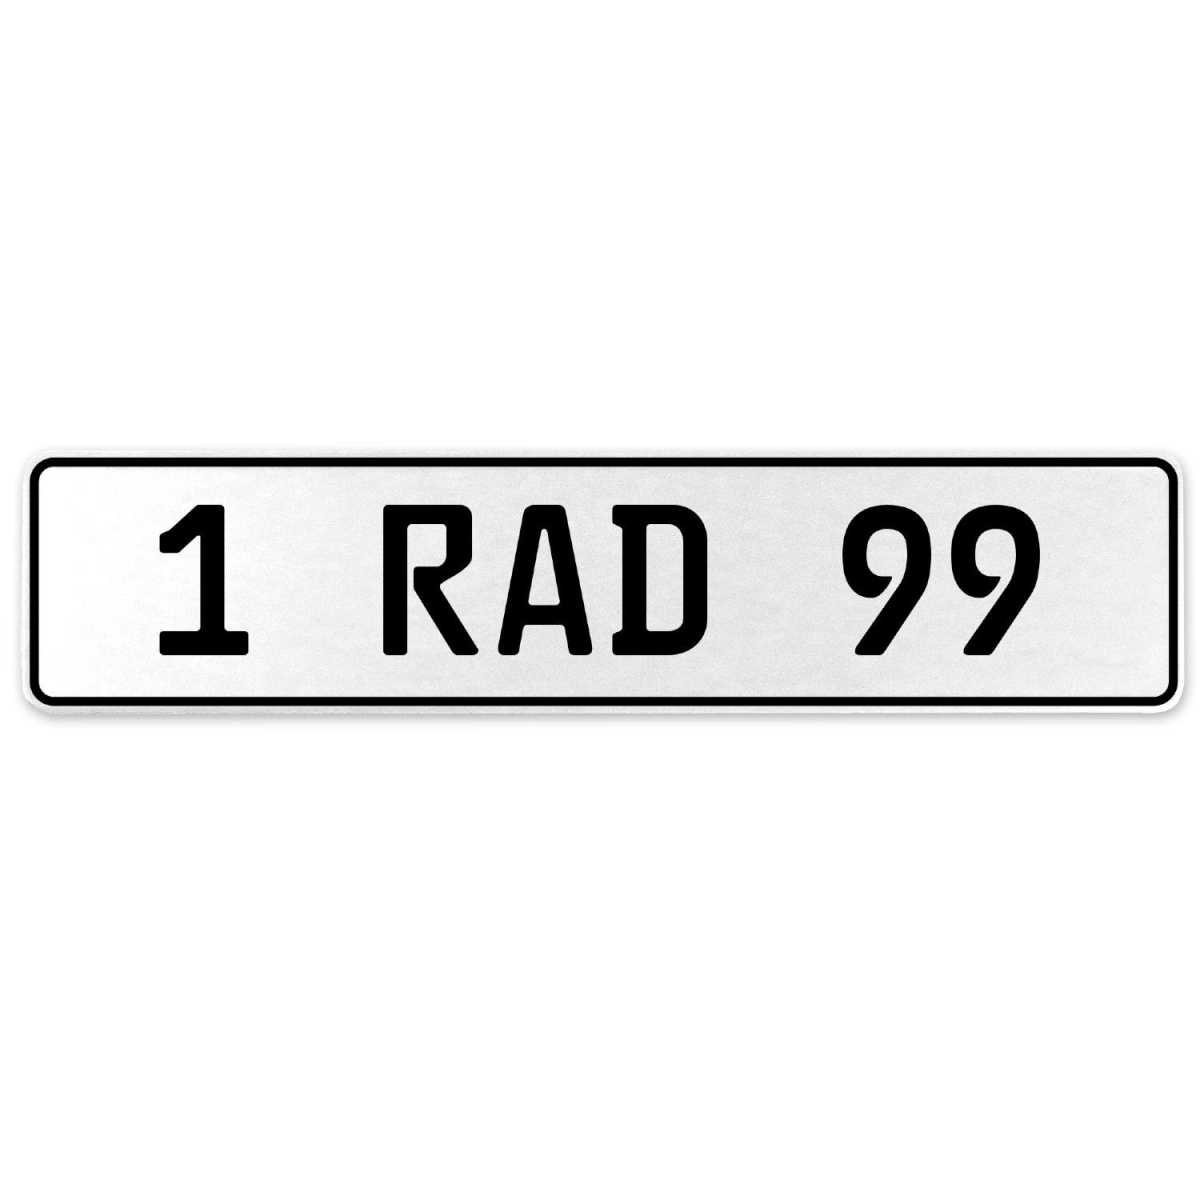 554102 1 Rad 99 - White Aluminum Street Sign Mancave Euro Plate Name Door Sign Wall